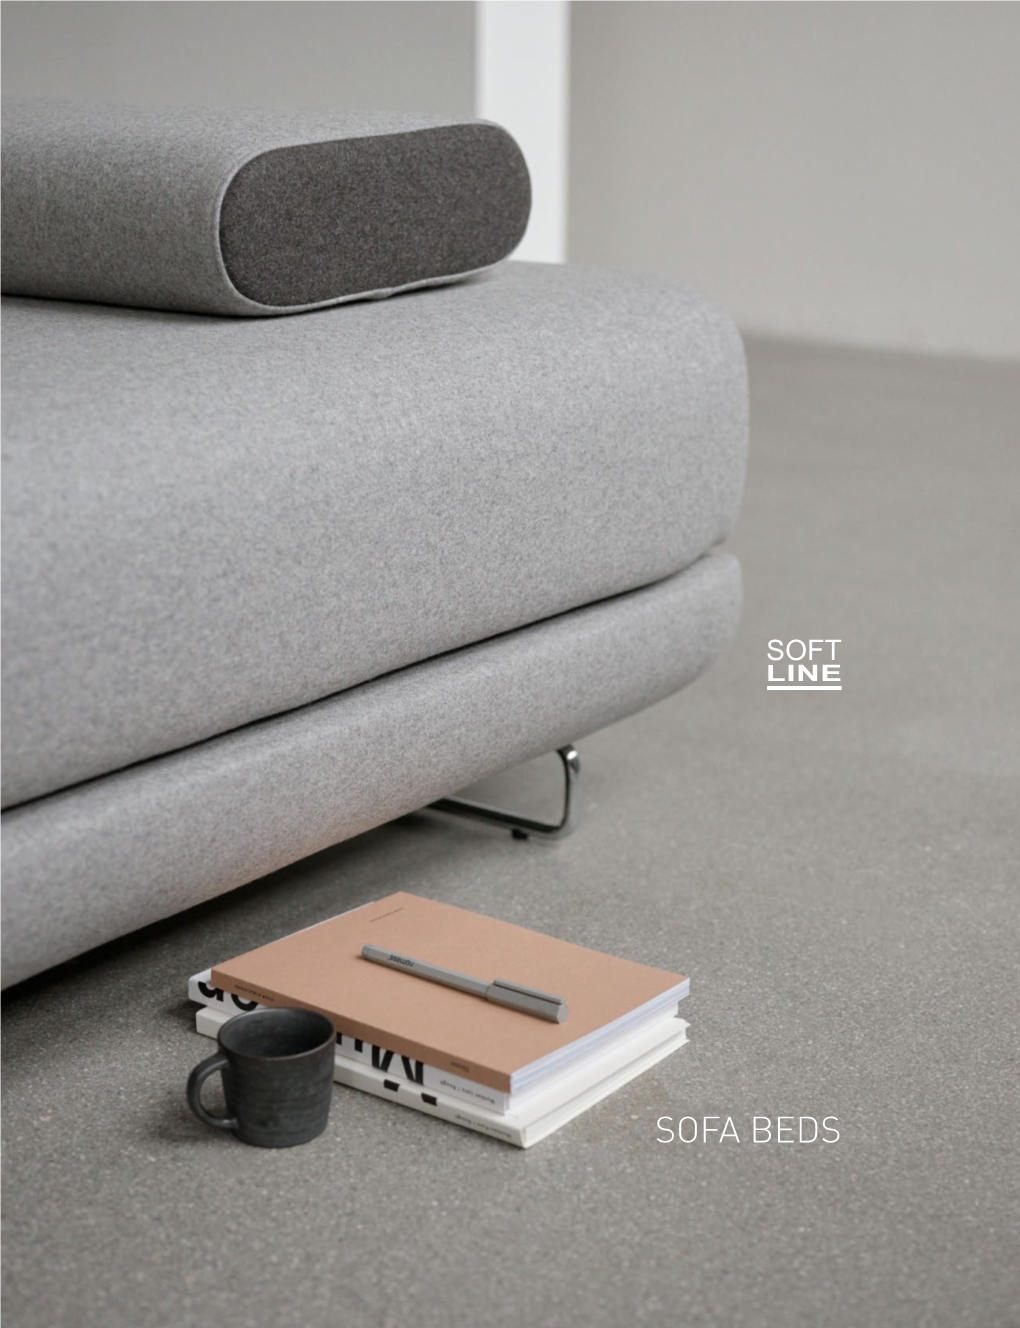 SOFA BEDS WELCOME a Sofa Bed Is a Versatile and Space-Saving Piece of Furniture